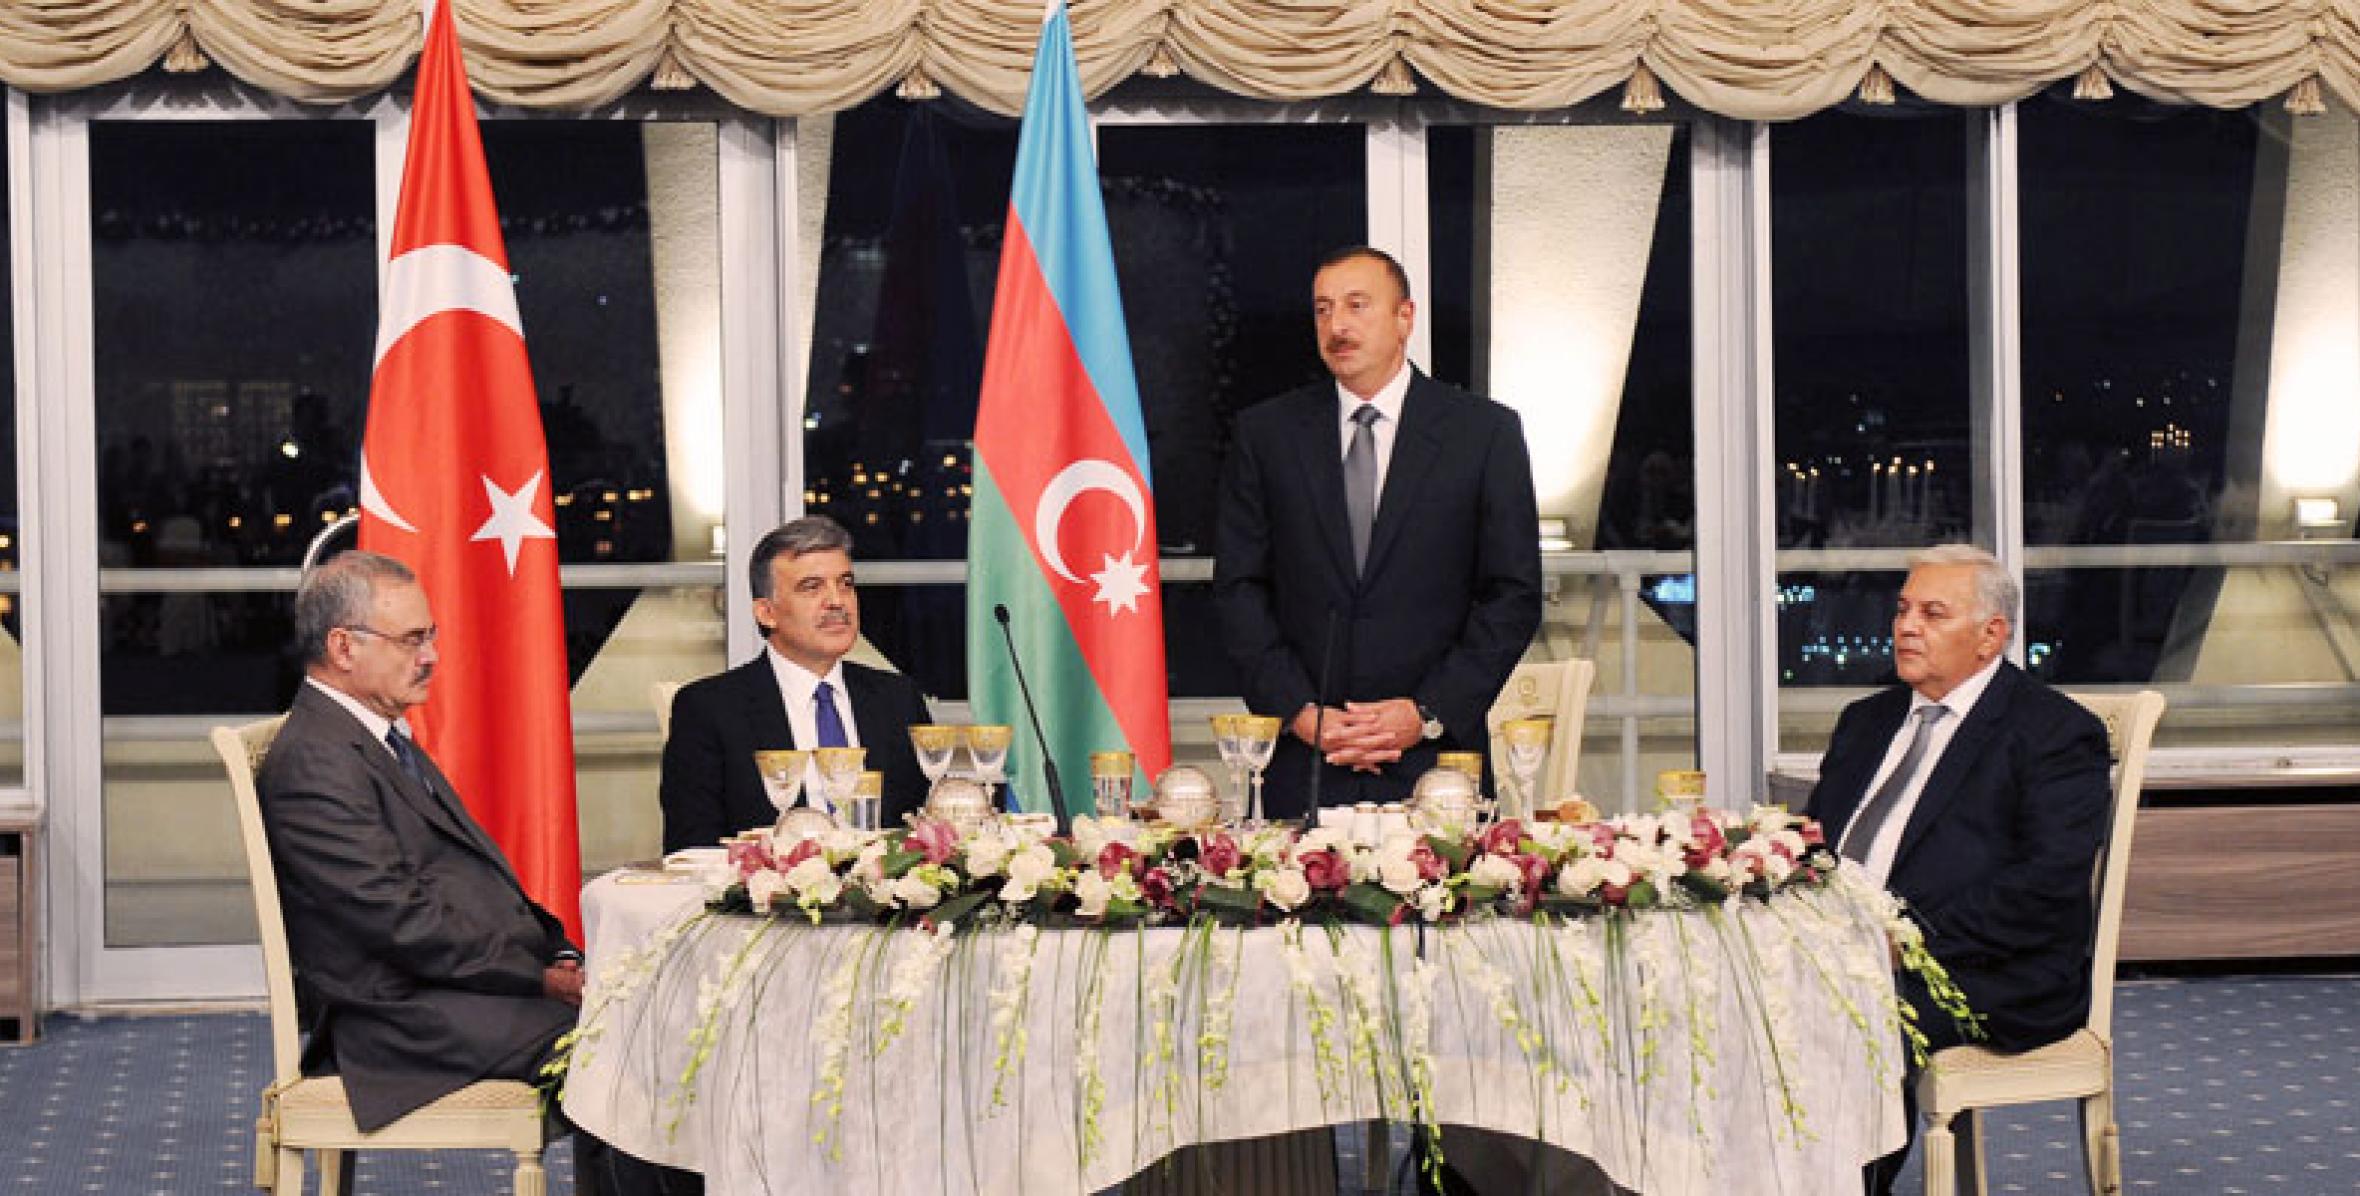 Official reception has been offered in honor of Abdullah Gul, the President of Turkey on behalf of Ilham Aliyev